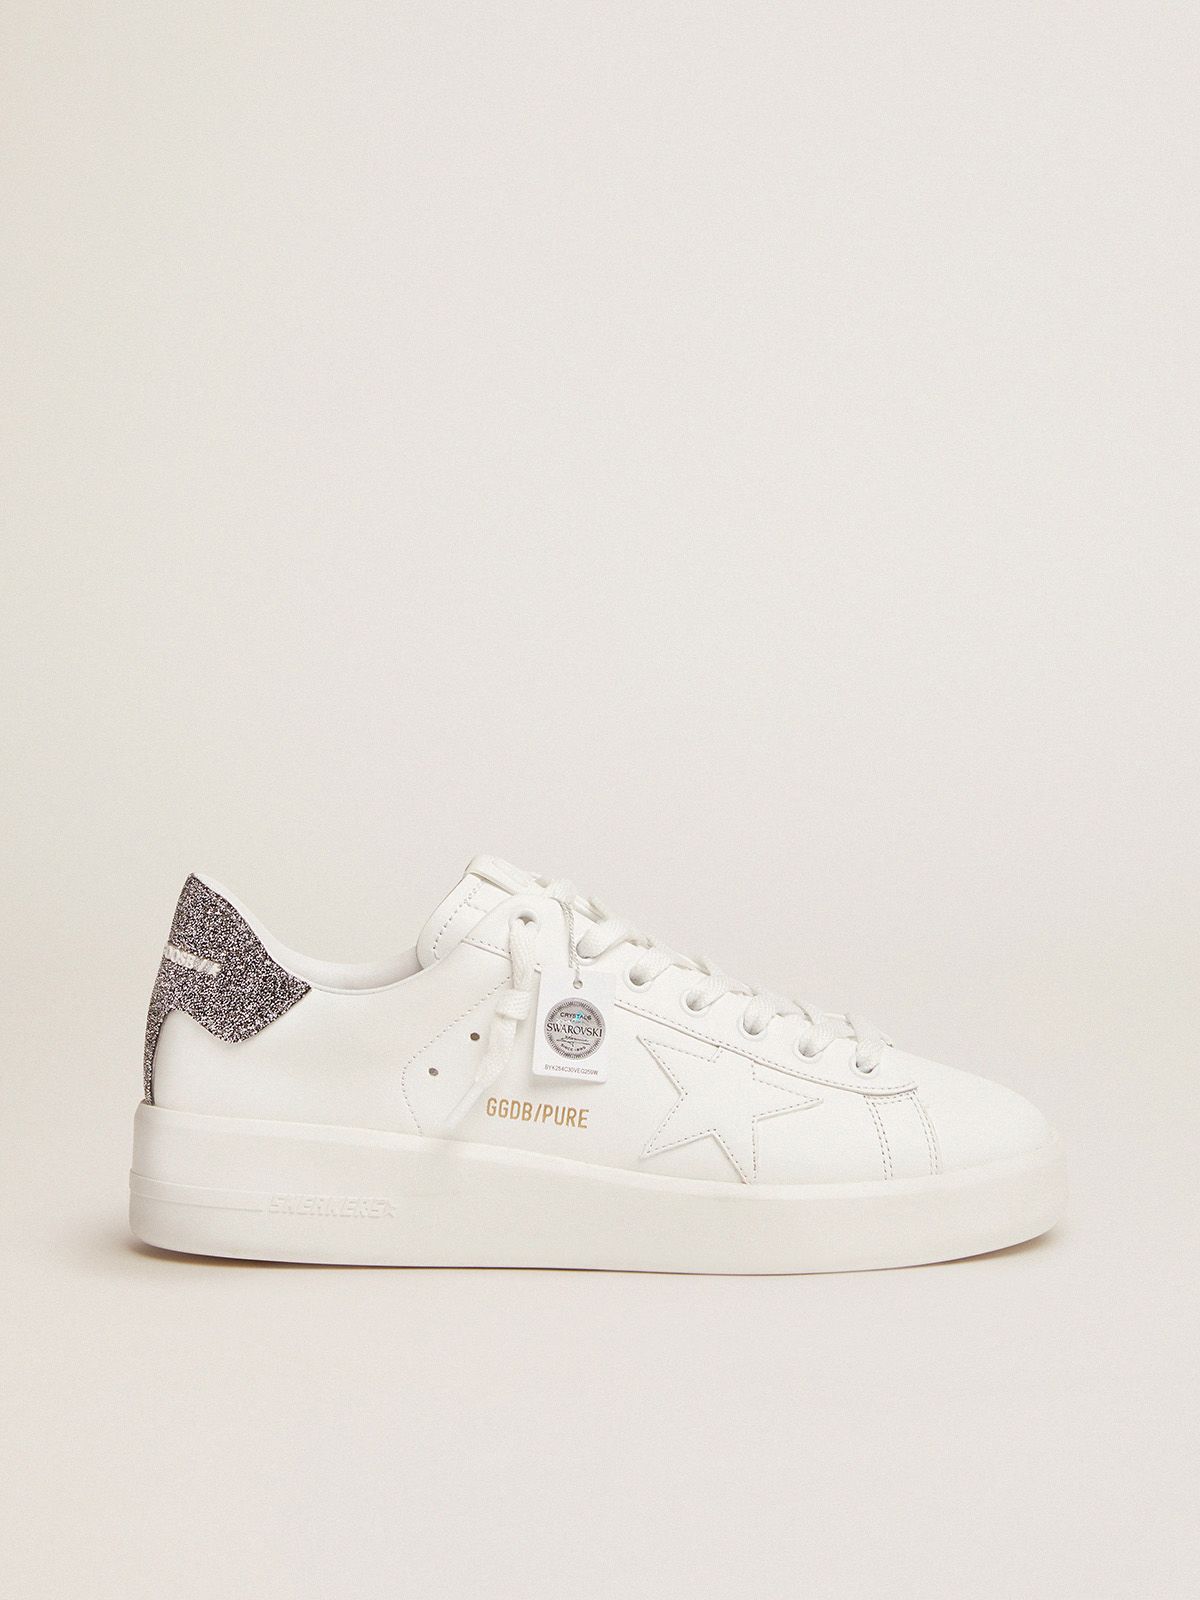 golden goose crystal leather white tab in Purestar sneakers silver heel with